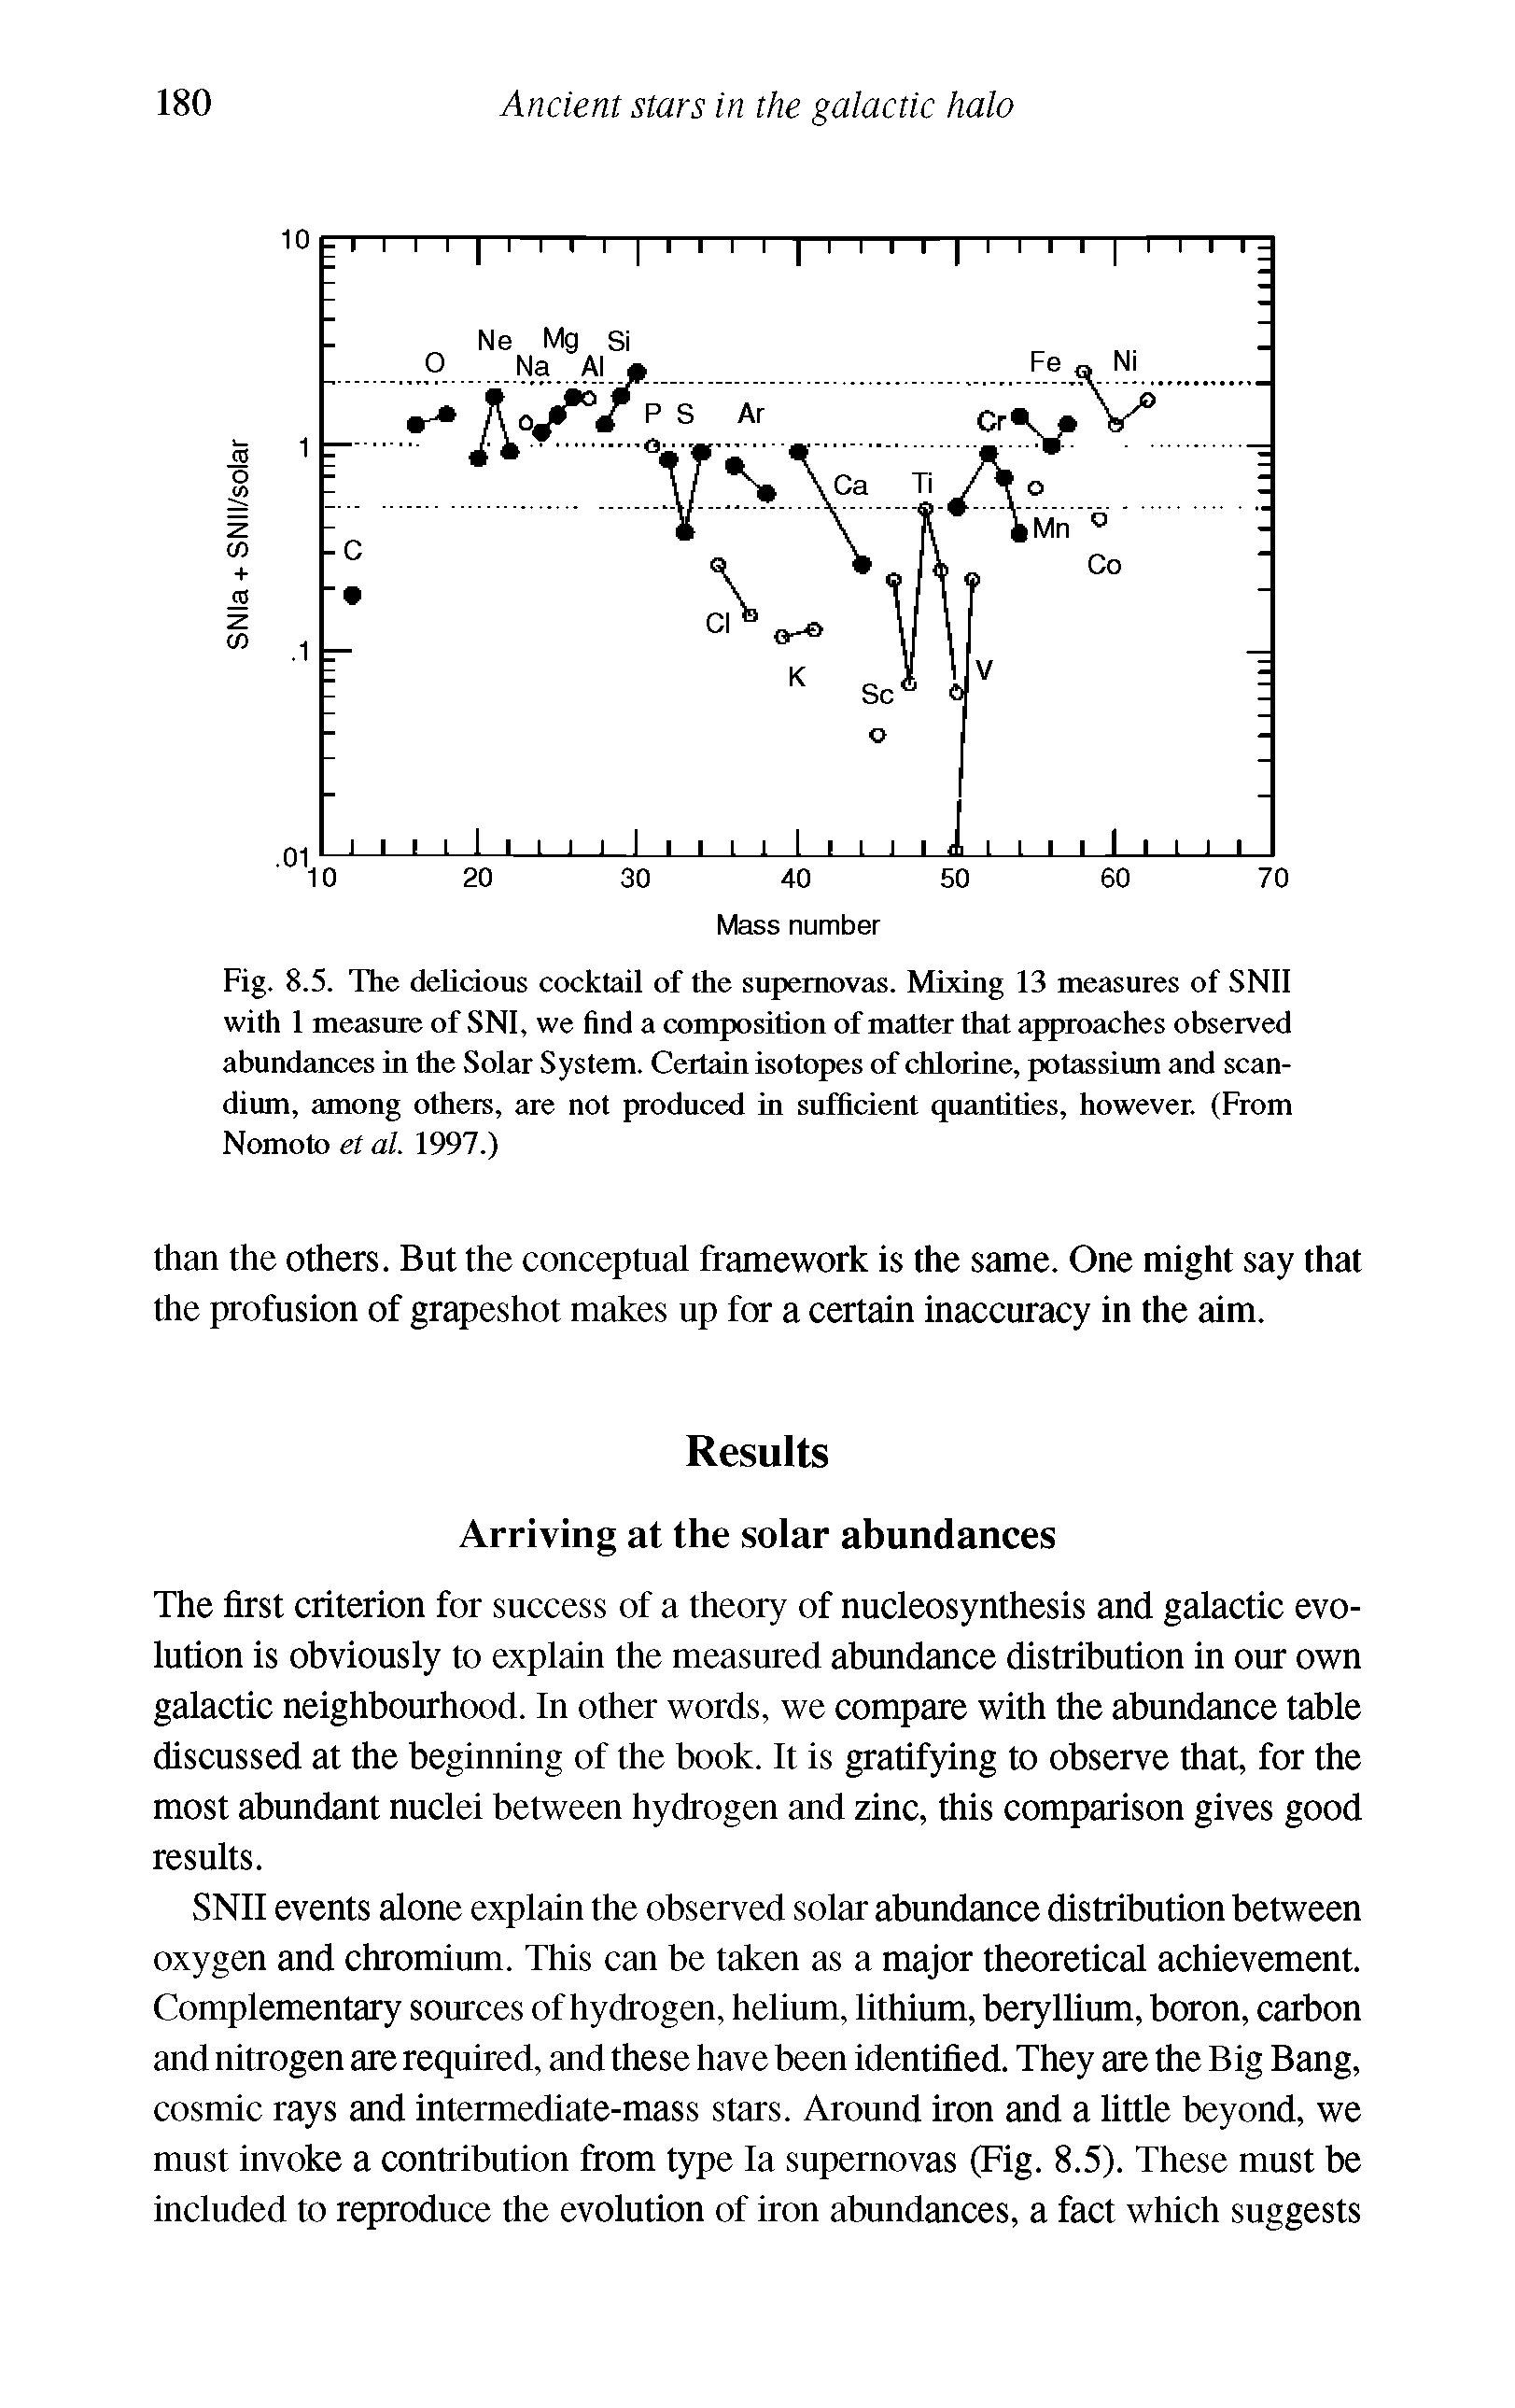 Fig. 8.5. The delicious cocktail of the supernovas. Mixing 13 measures of SNll with 1 measure of SNl, we find a composition of matter that approaches observed abundances in the Solar System. Certain isotopes of chlorine, potassium and scandium, among others, are not produced in snfficient qnantities, however. (From Nomoto et at. 1997.)...